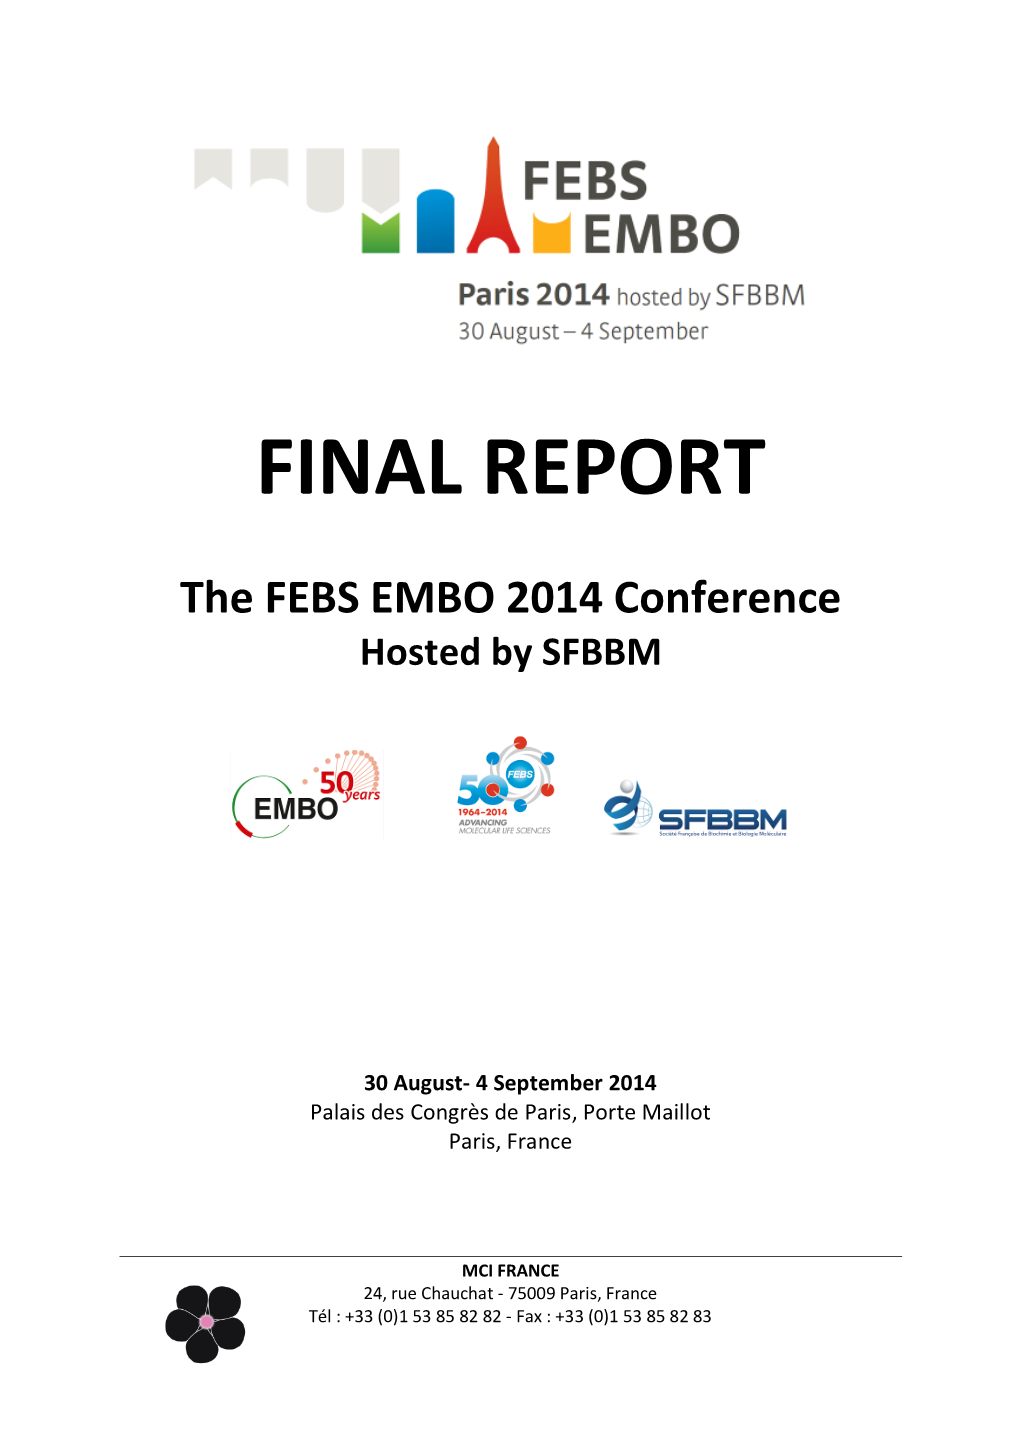 FINAL REPORT the FEBS EMBO 2014 Conference Hosted by SFBBM